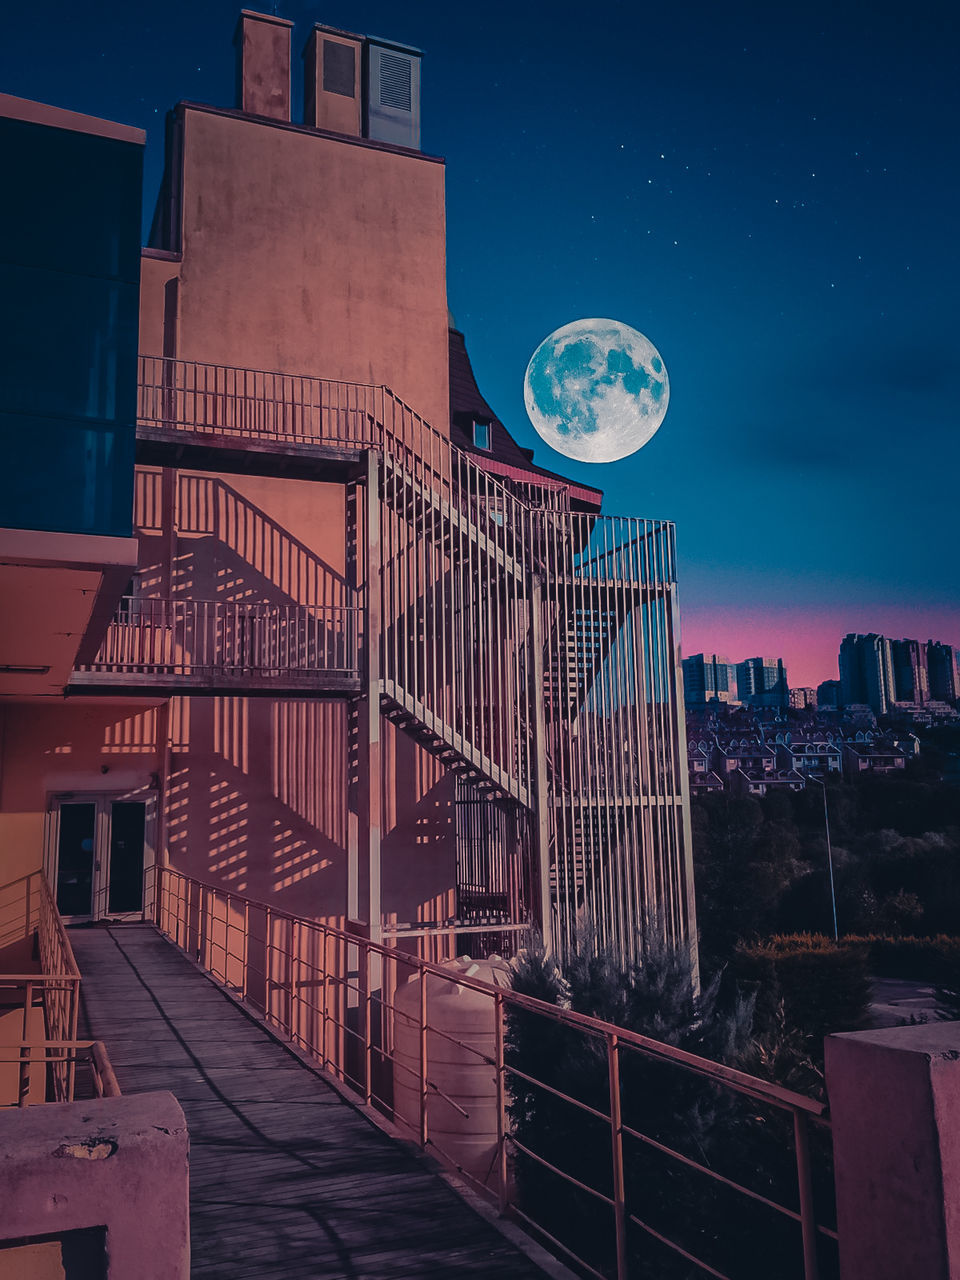 architecture, night, sky, built structure, moon, space, building exterior, astronomy, city, screenshot, no people, building, nature, railing, darkness, landmark, staircase, dusk, outdoors, evening, communication, skyscraper, full moon